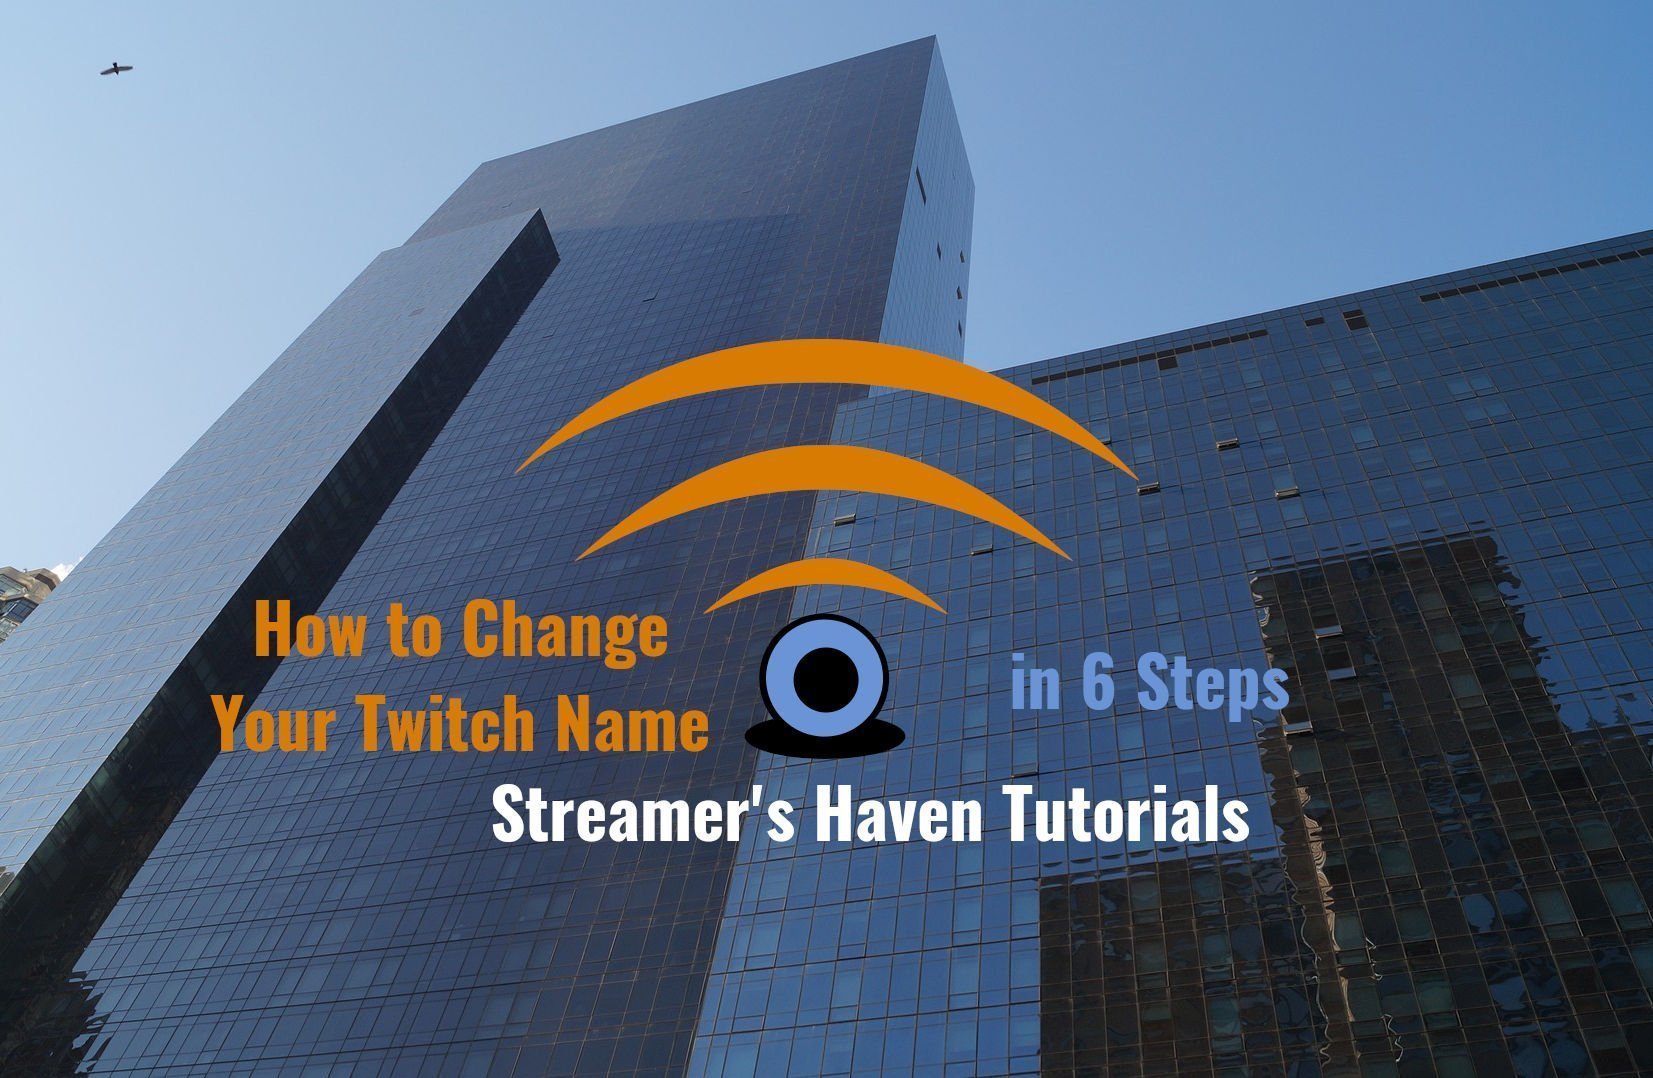 Looking to Change your Twitch name?